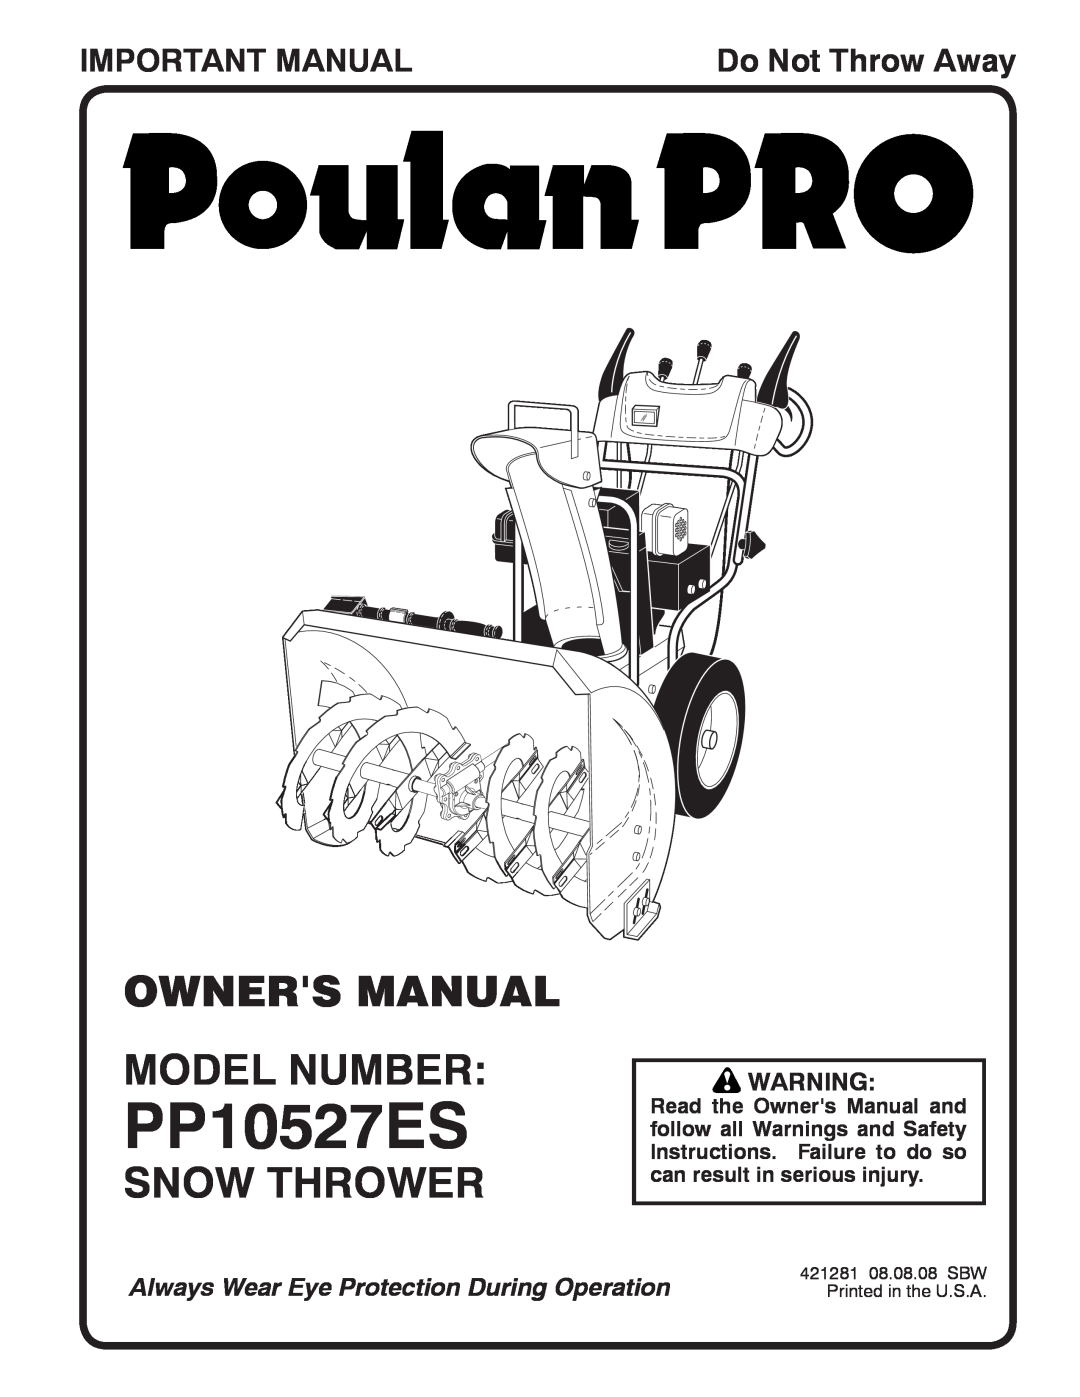 Poulan 421281, 96192002001 owner manual Snow Thrower, Important Manual, PP10527ES, Do Not Throw Away 